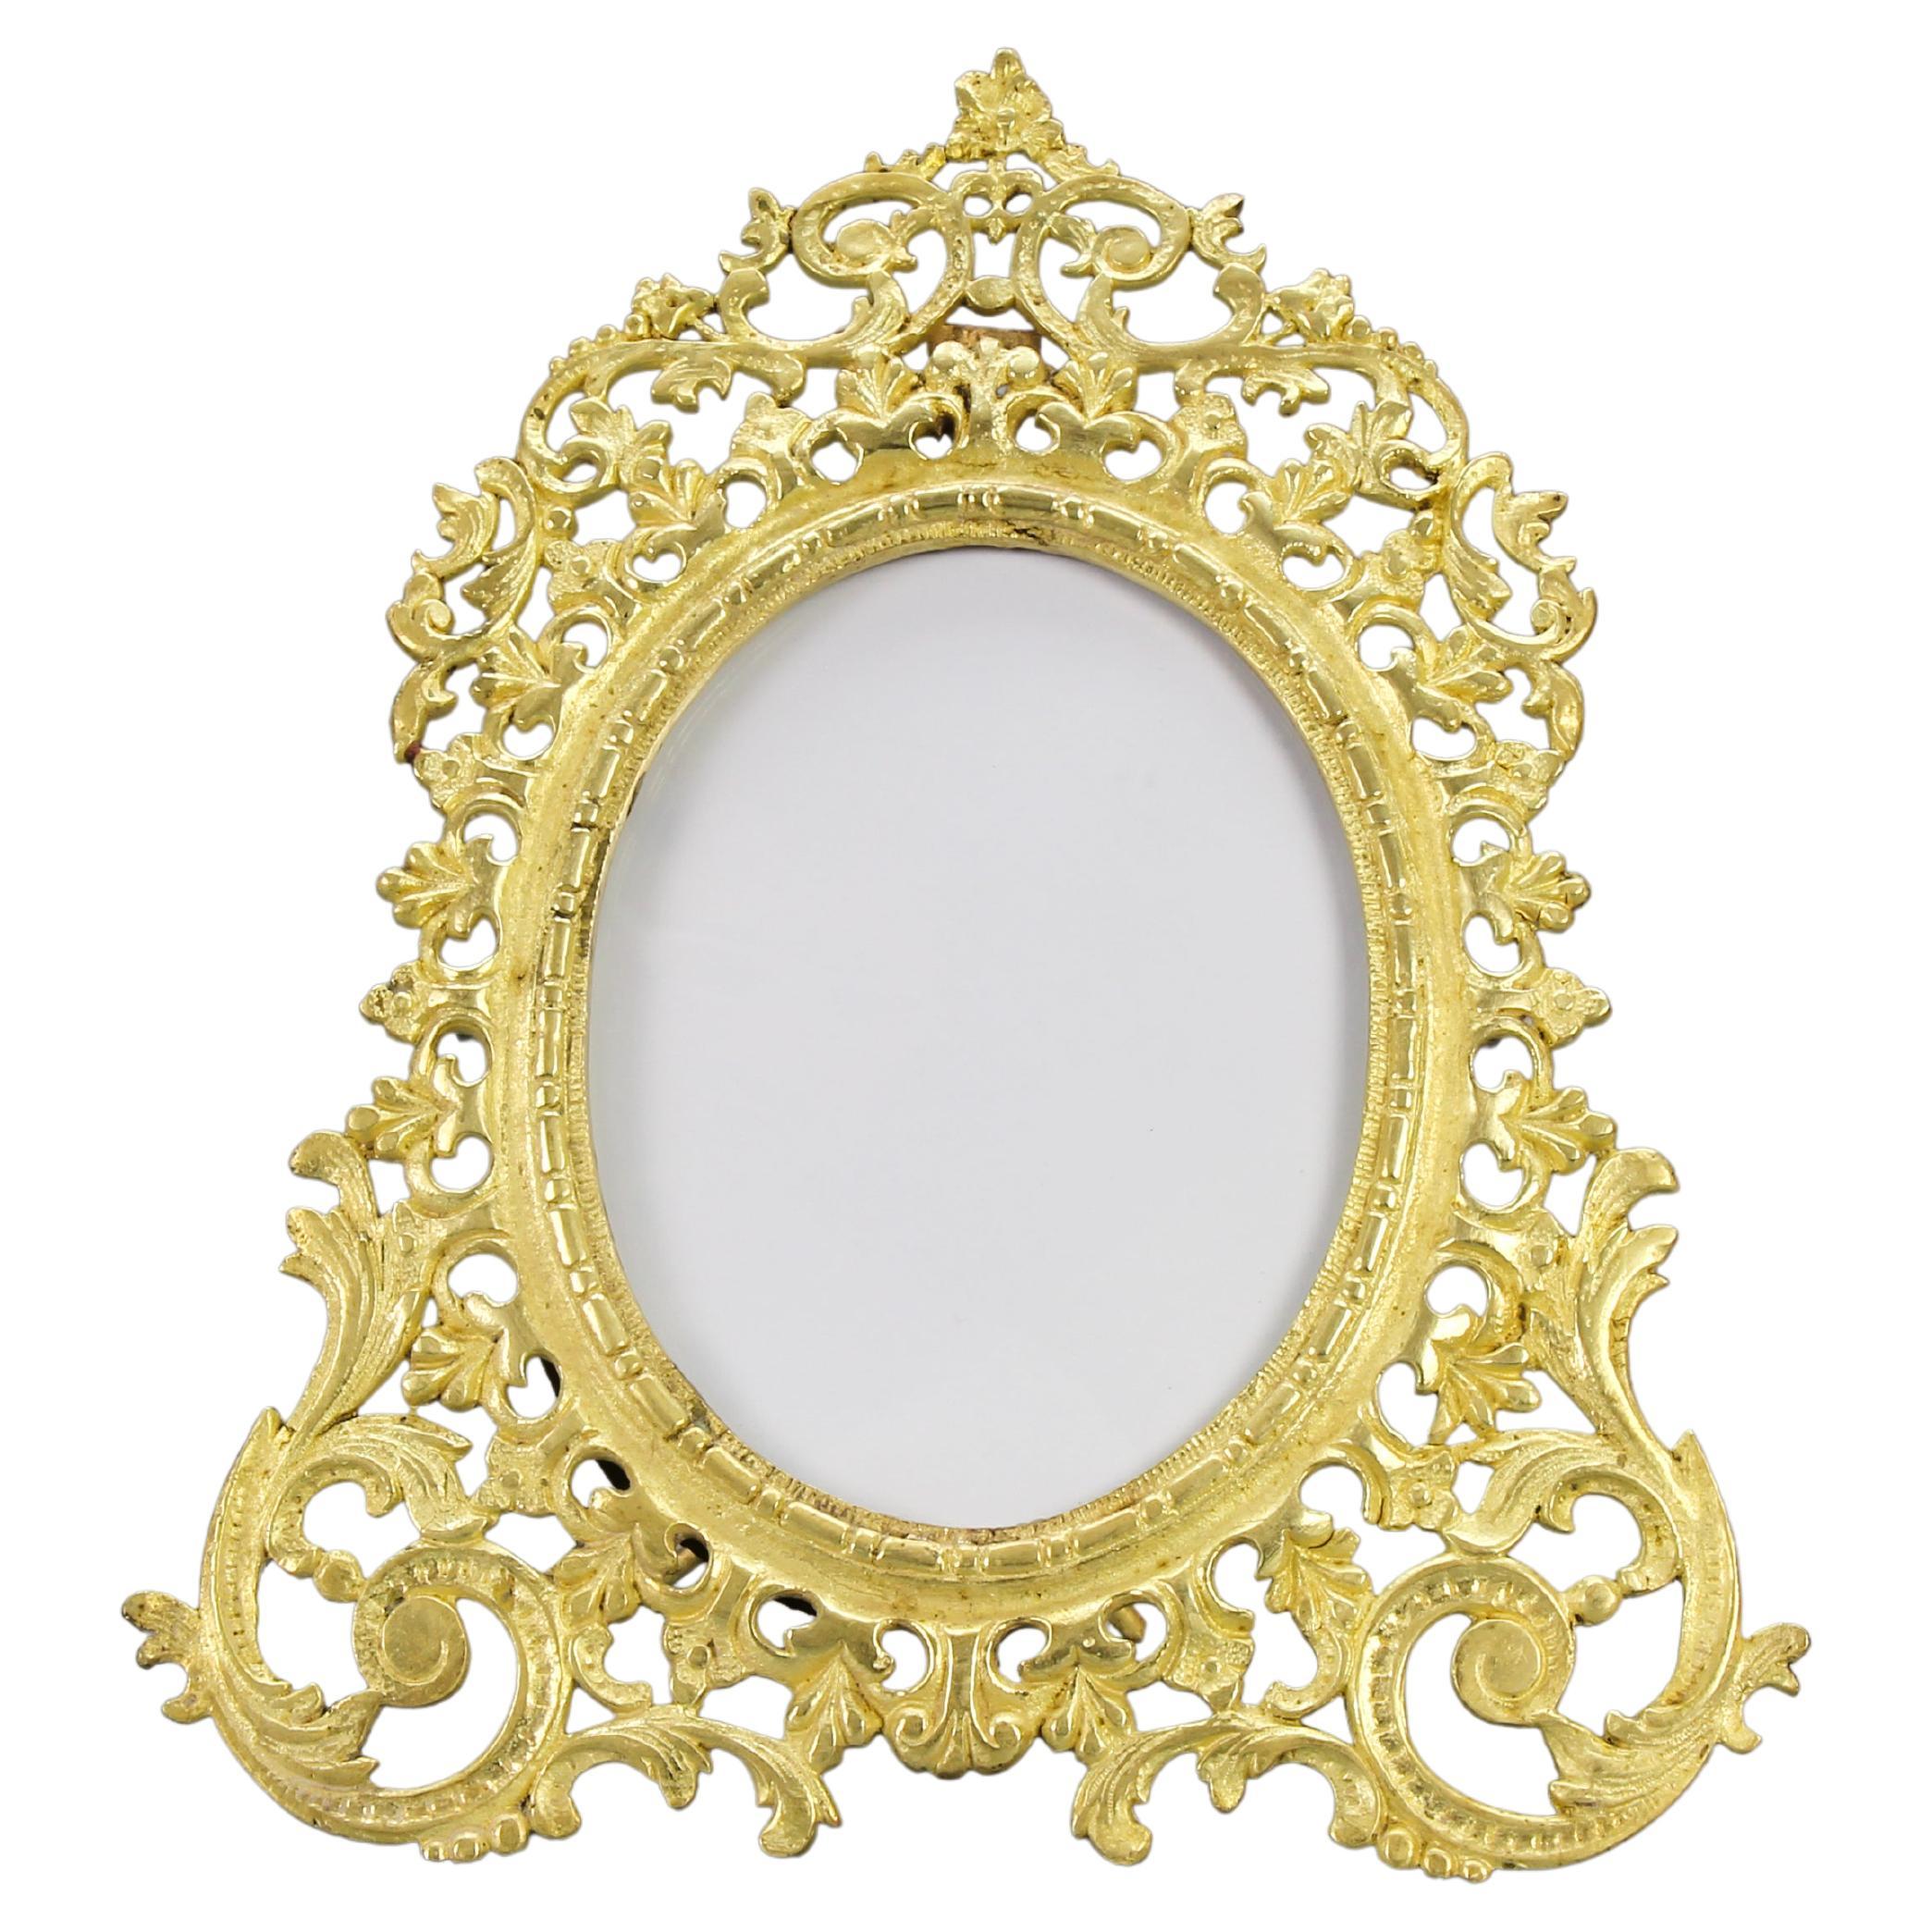 French Bronze Neoclassical Style Round Desktop Picture Frame, Late 19th Century For Sale